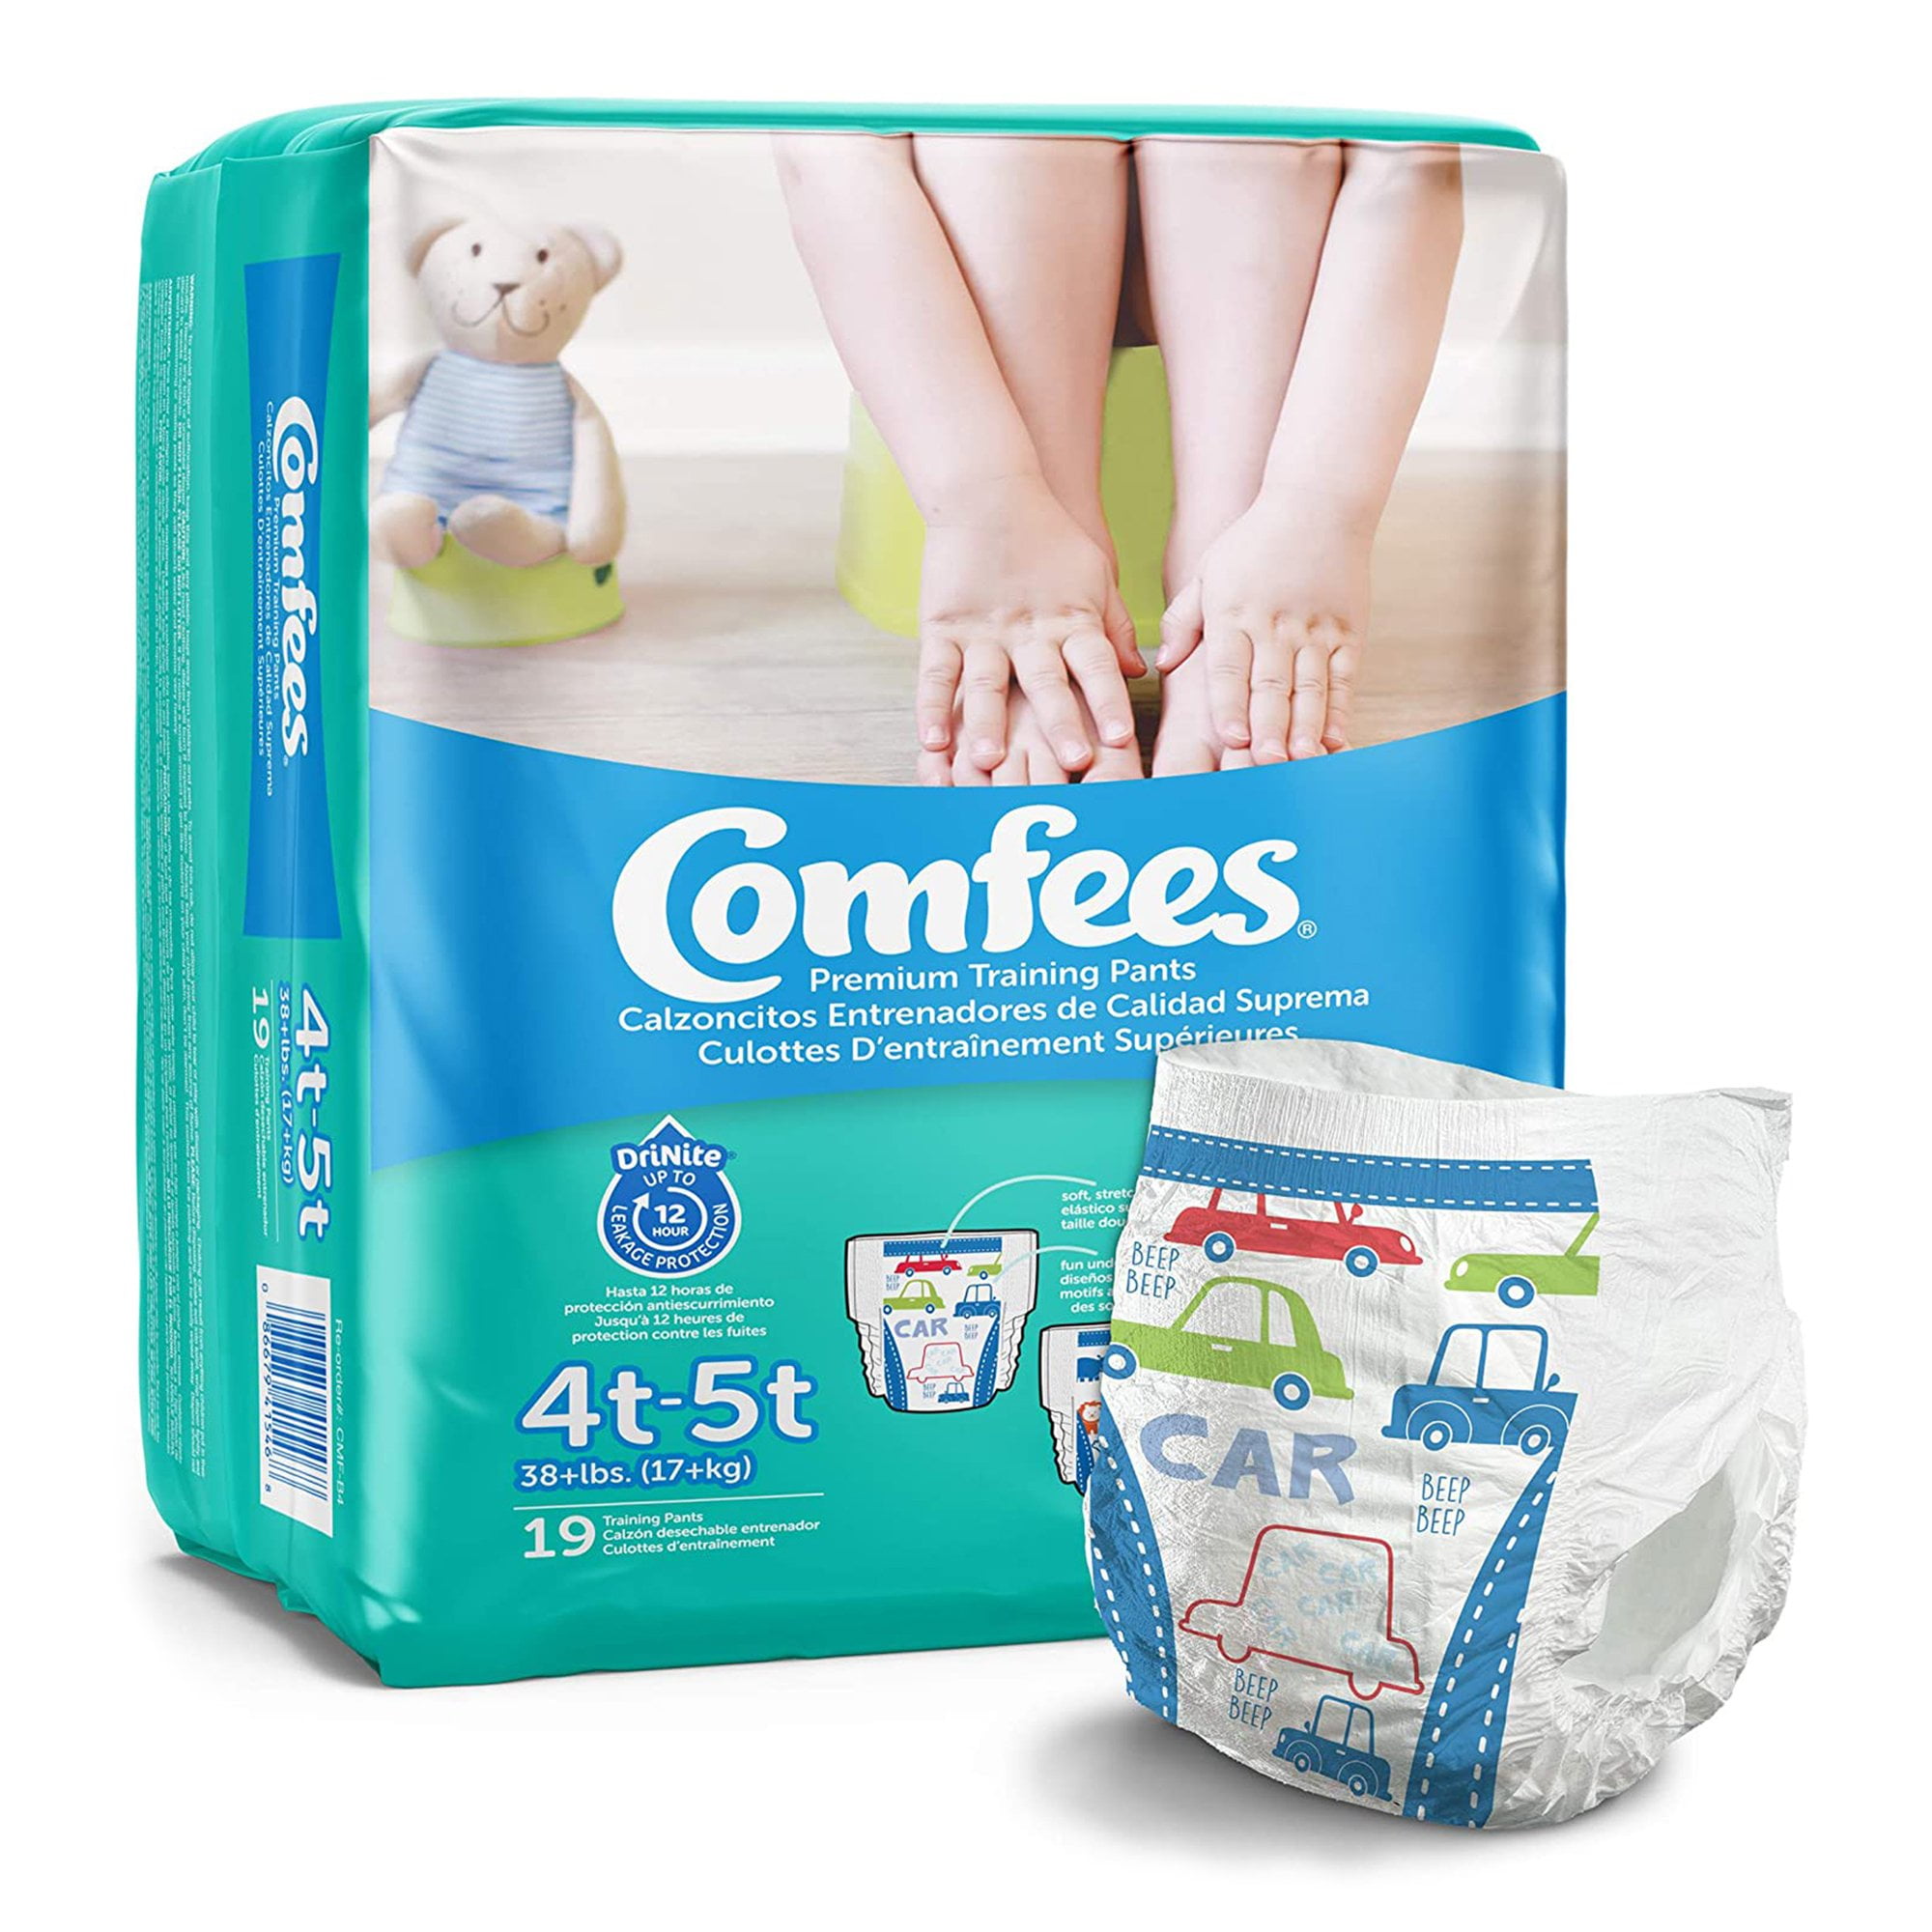 Pack 114 PAMPERS Premium Protection Size 3 (6 to 10 kg) Baby Changes